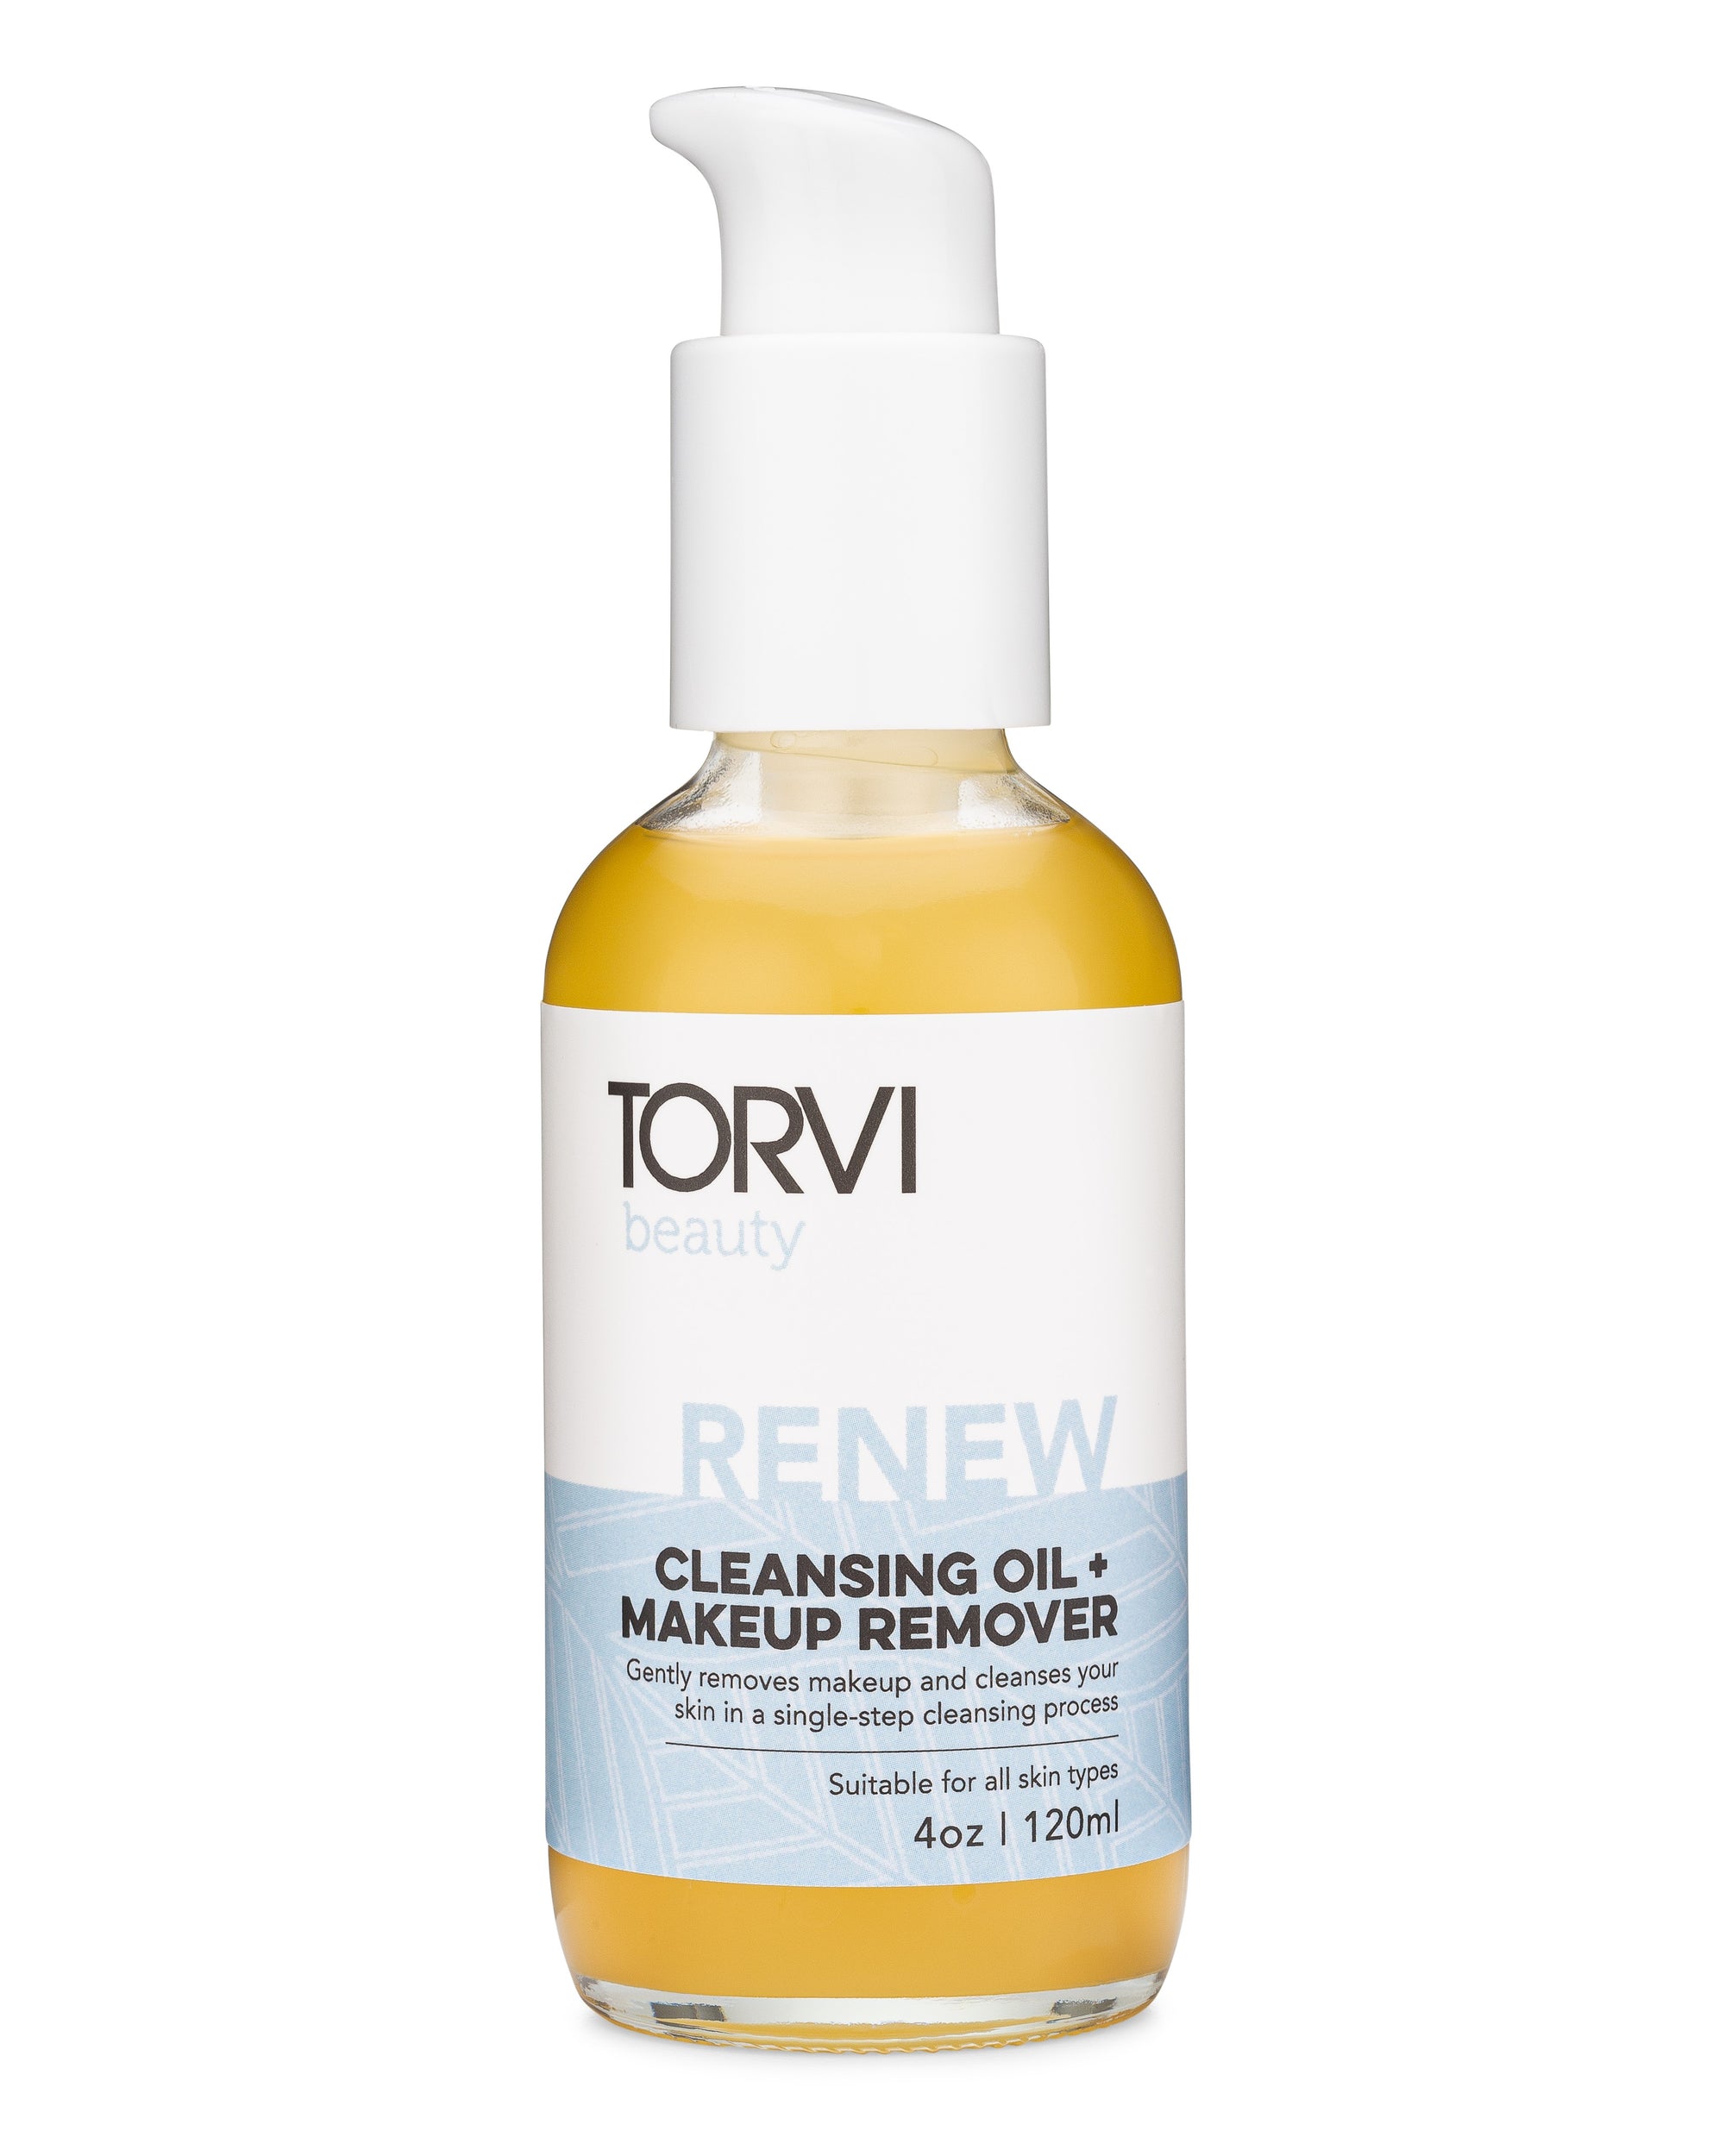 Cleansing Oil + Makeup Remover